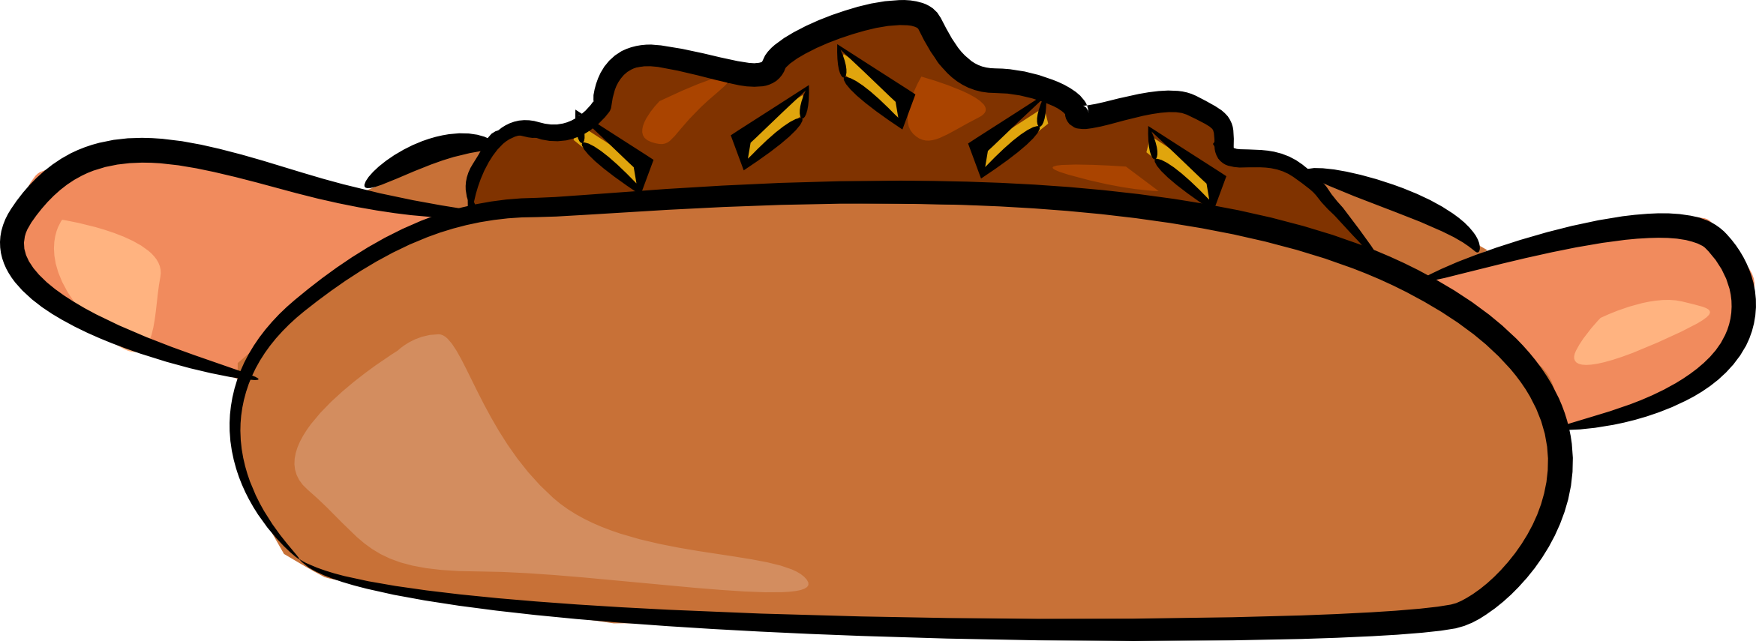 Chili cute dog clip art free free clipart images